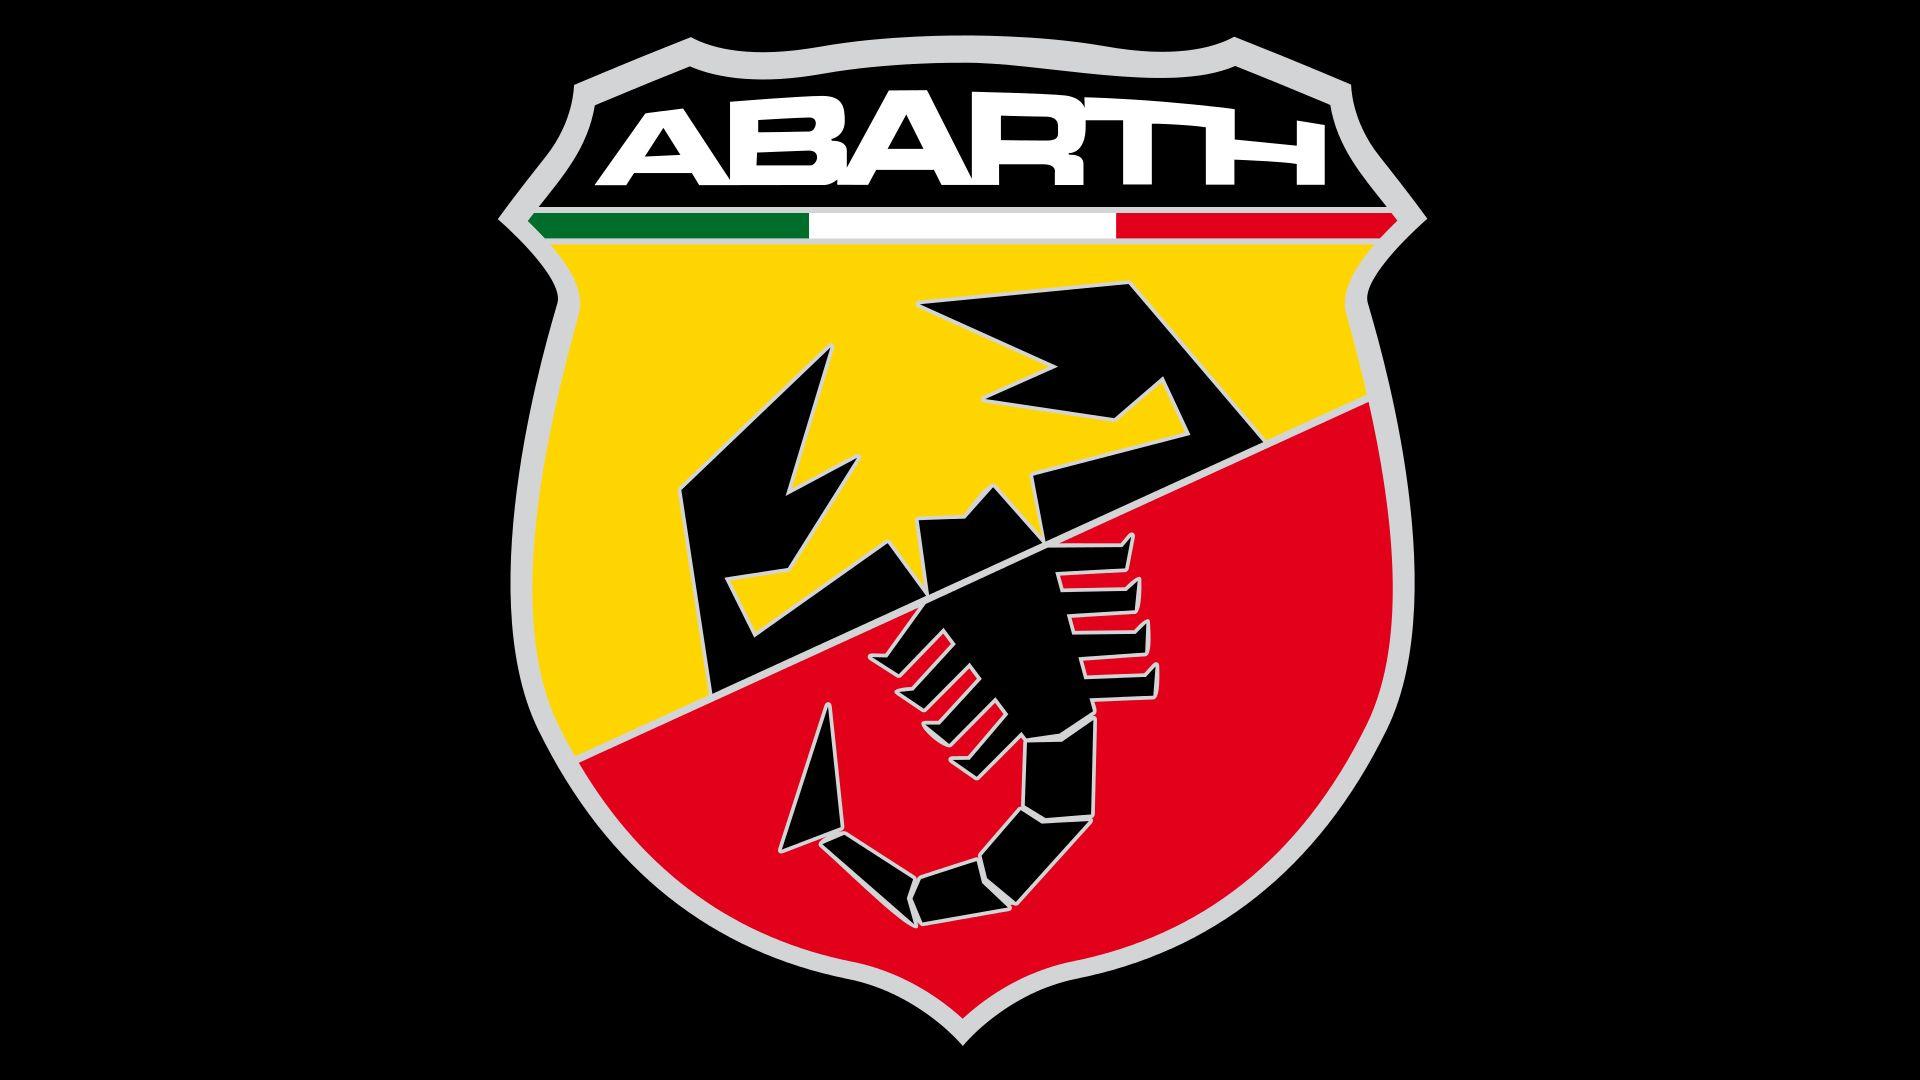 Red and Yellow Car Logo - Abarth Logo Meaning and History, latest models | World Cars Brands